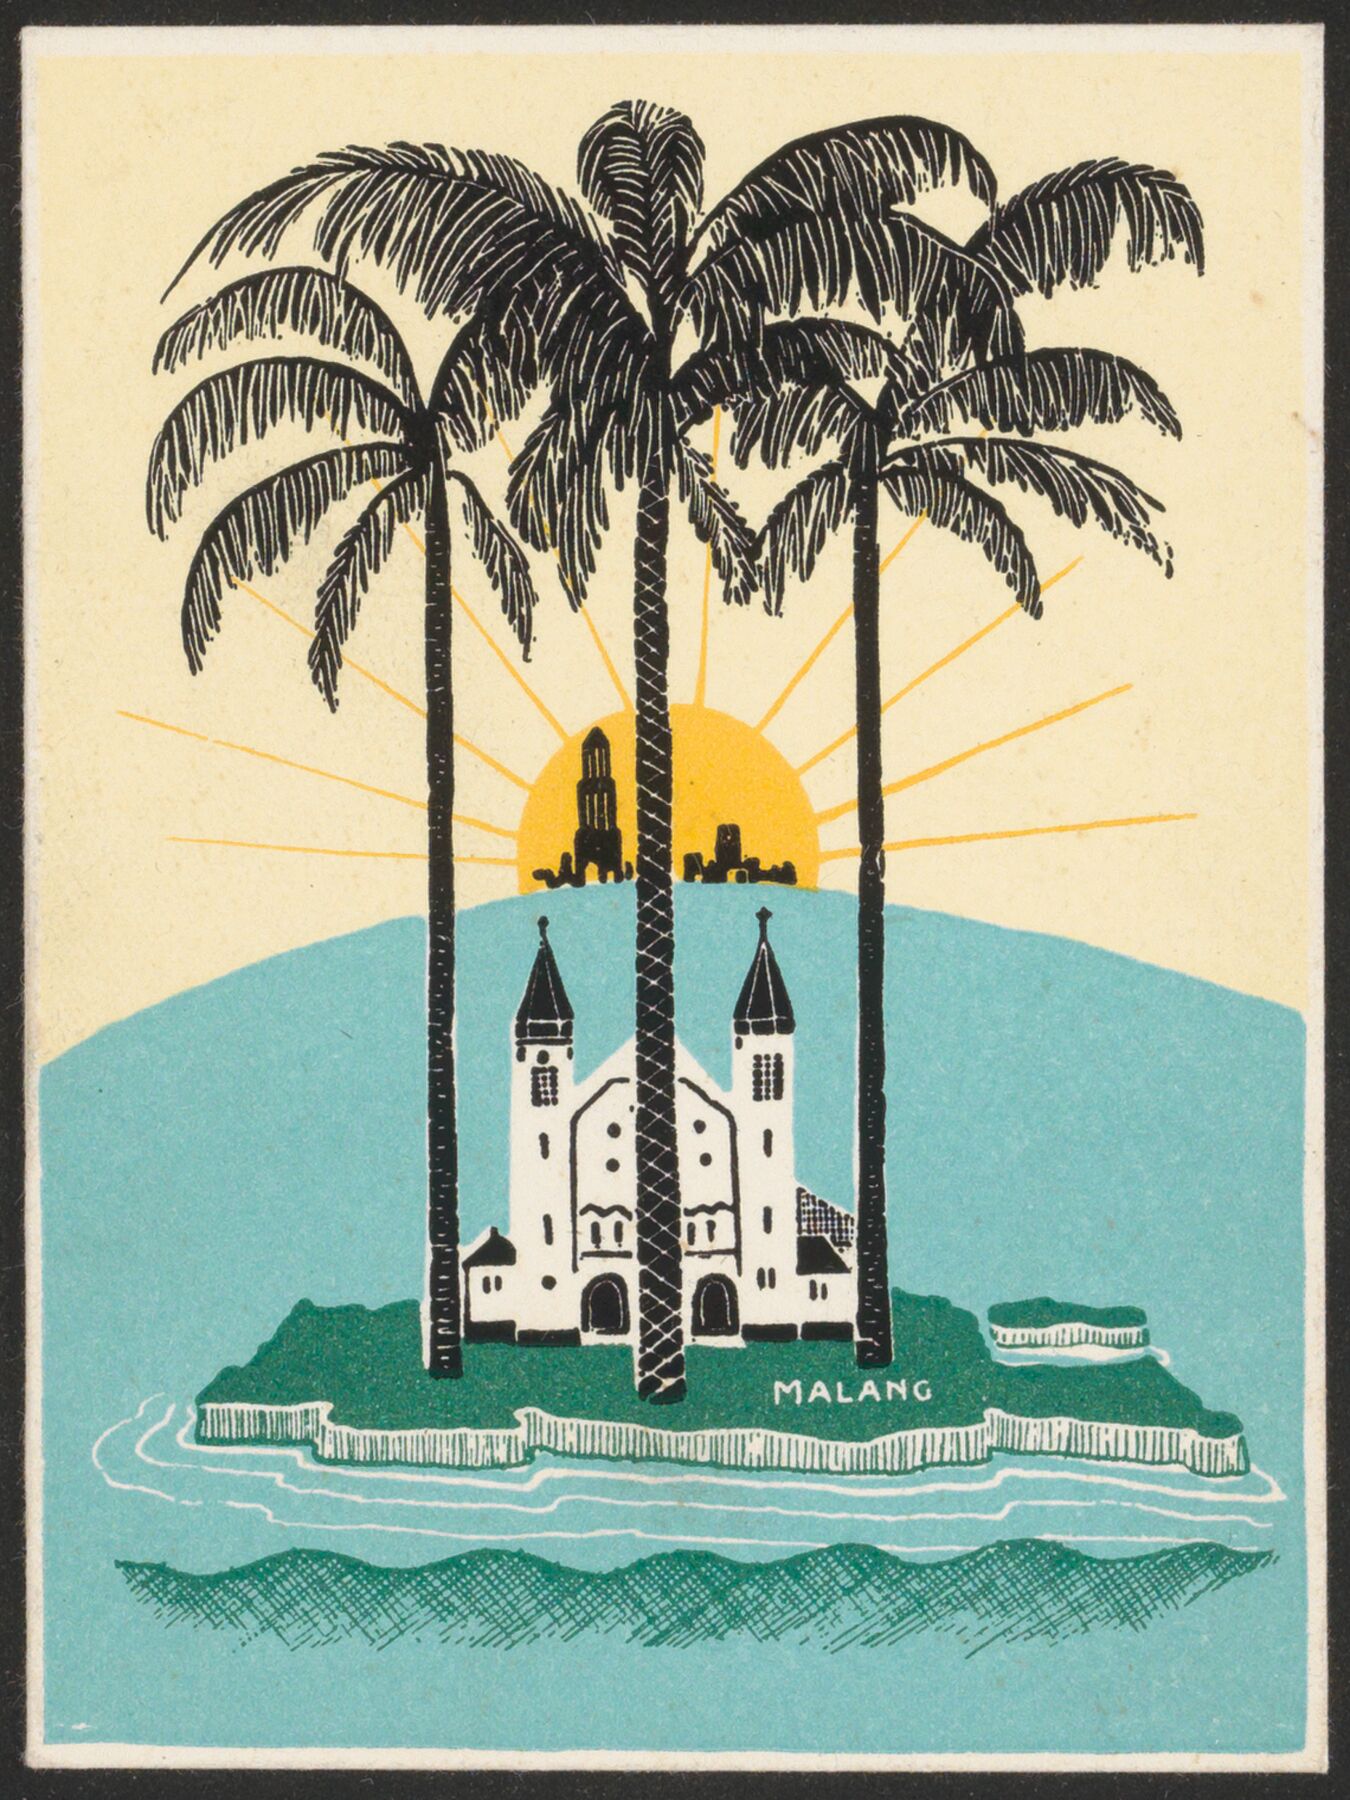 View of the island of Malang with a church under palm trees and a rising sun, anonymous, c. 1930 - c. 1949